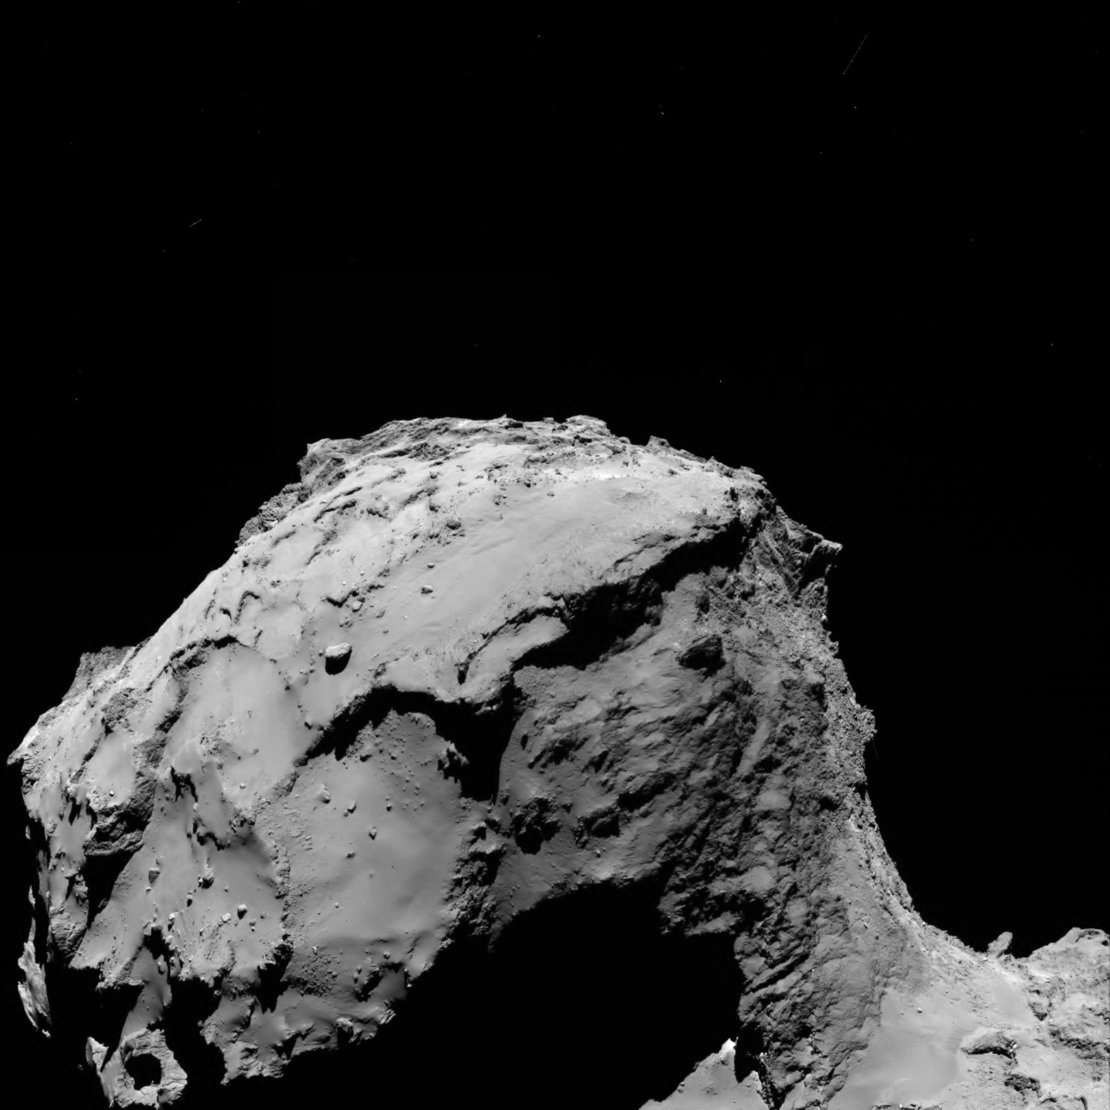 Comet 67P from 9.8 miles (15.5 km)